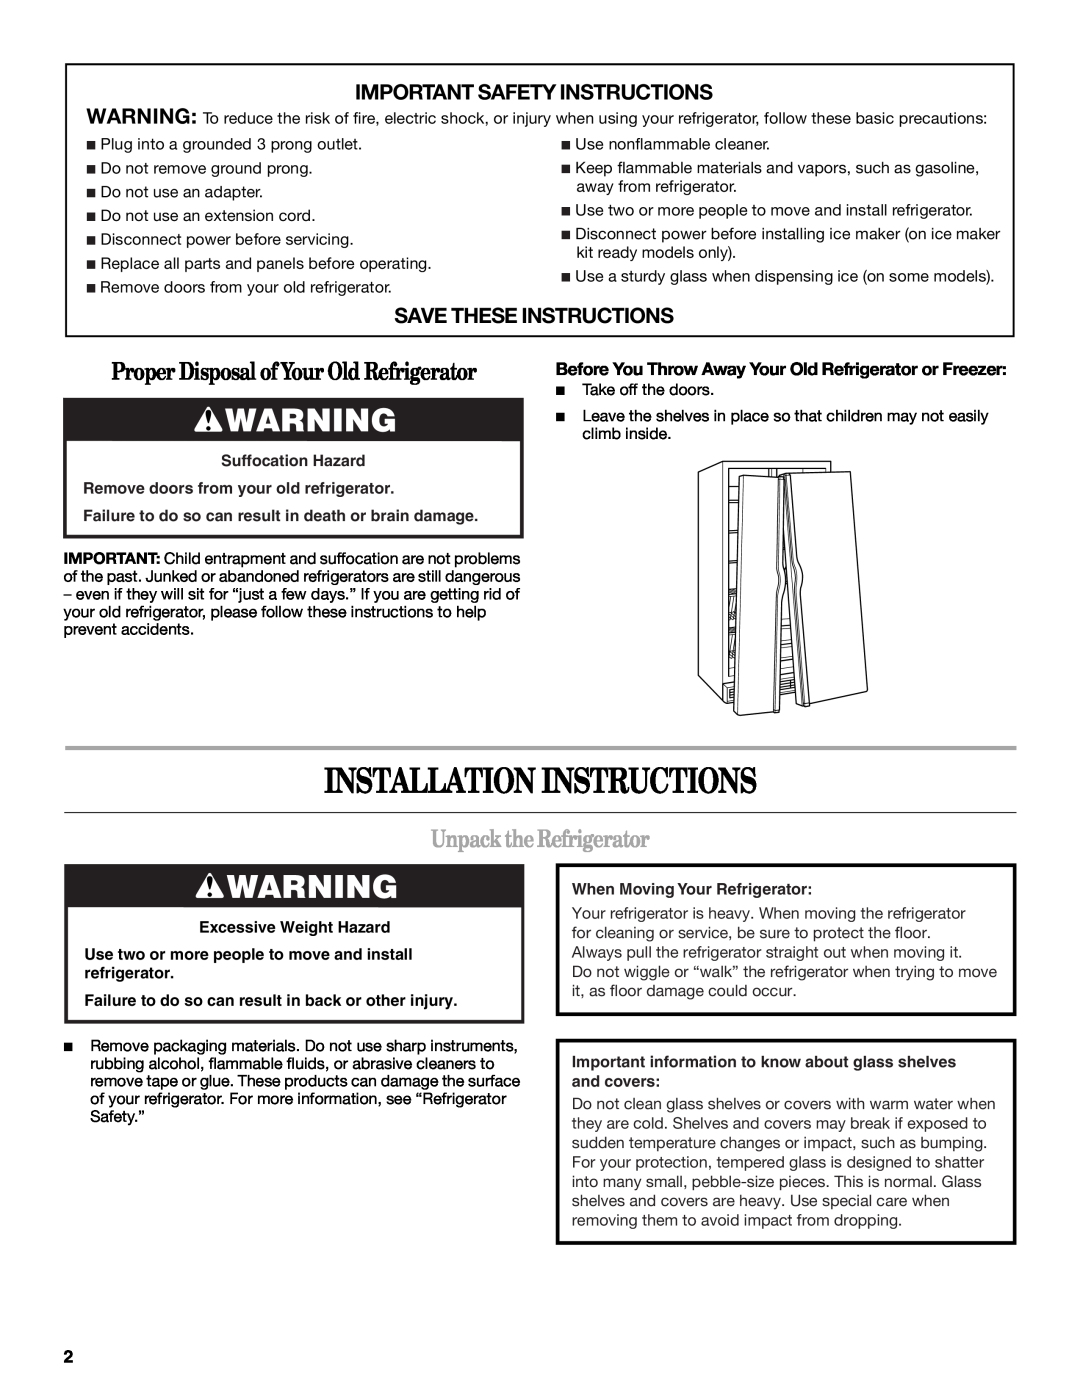 Whirlpool ED5FHAXV Installation Instructions, Unpack the Refrigerator, Important Safety Instructions 